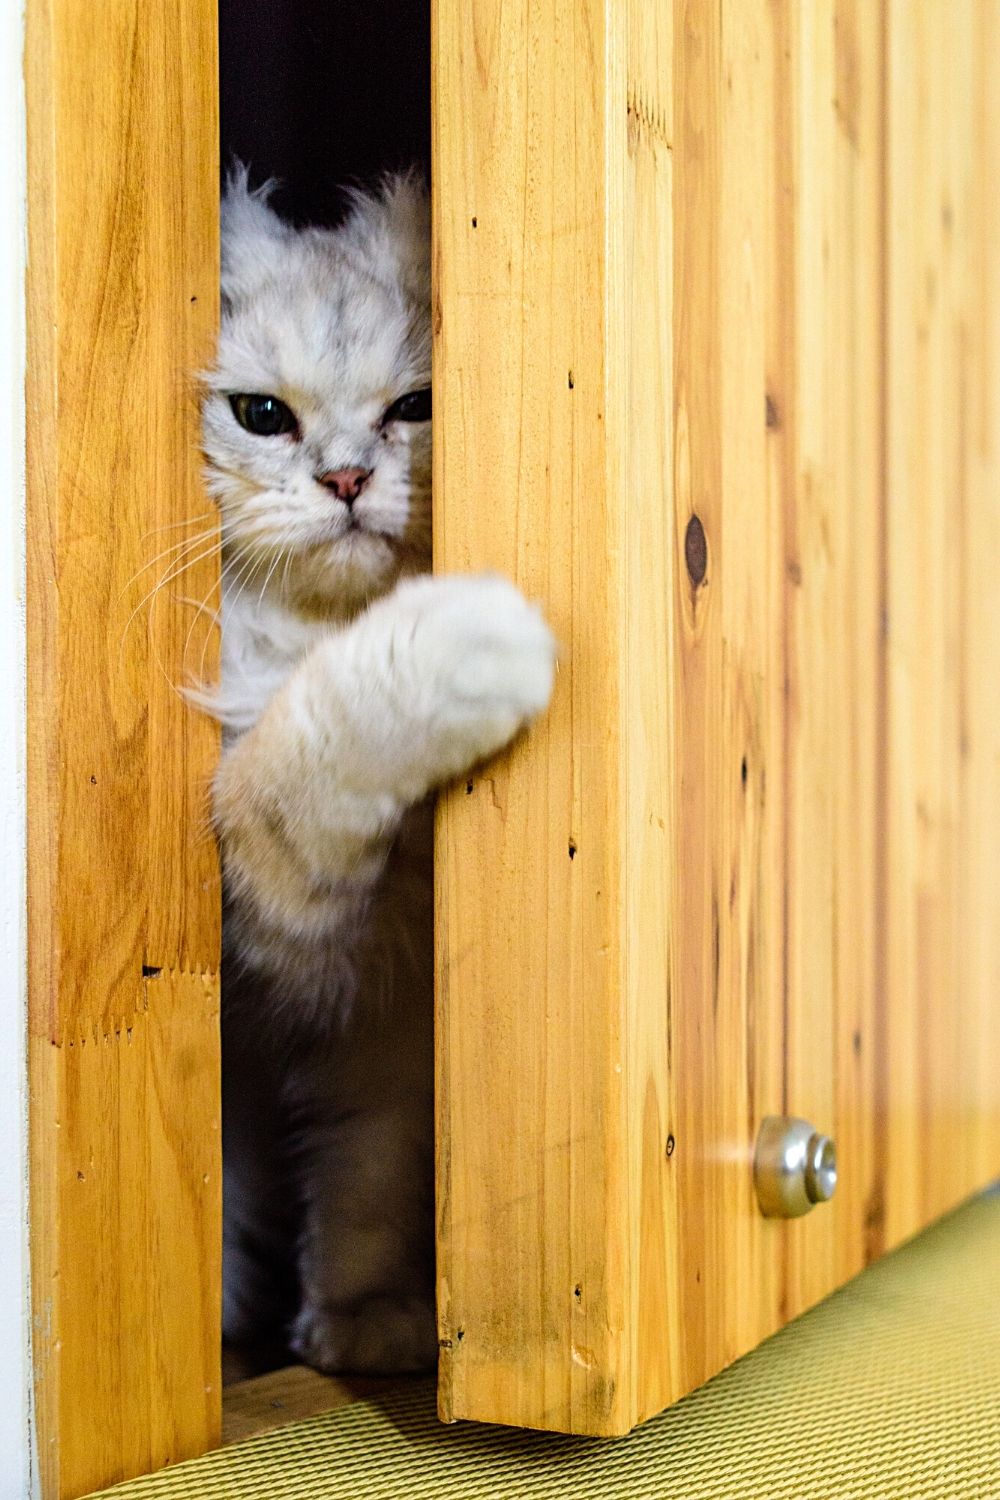 A cat hates closed doors because it wants to be a part of the activity happening on the other side of the door